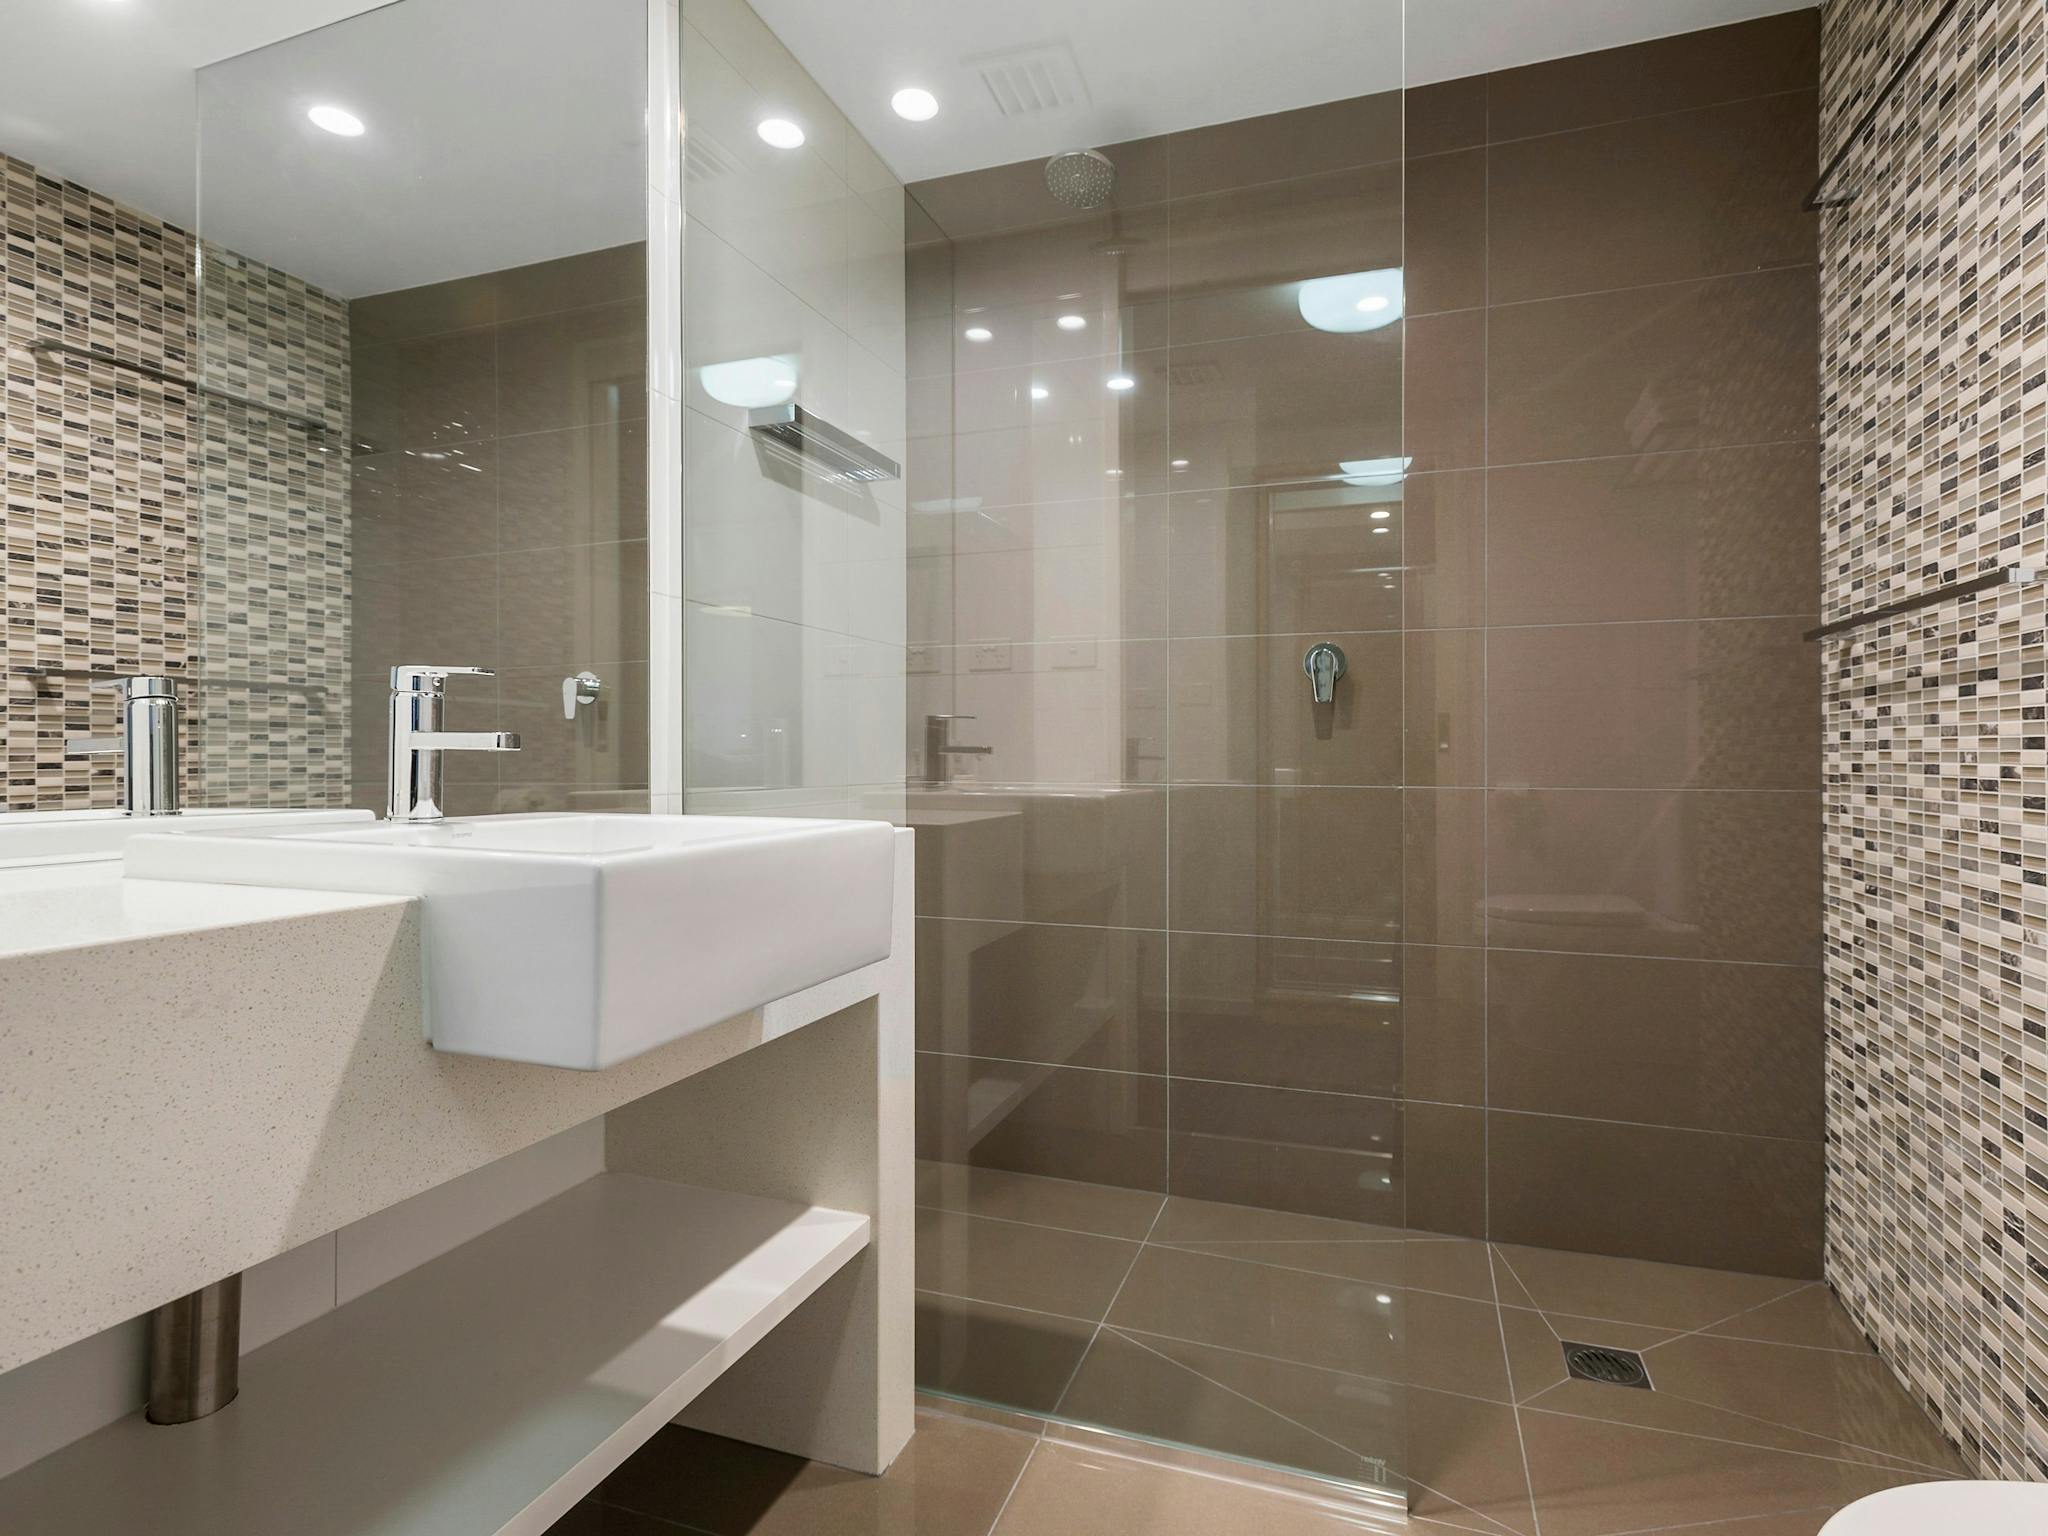 The Gateways Queen Suite Bathrooms feature walk in shower and modern amenities